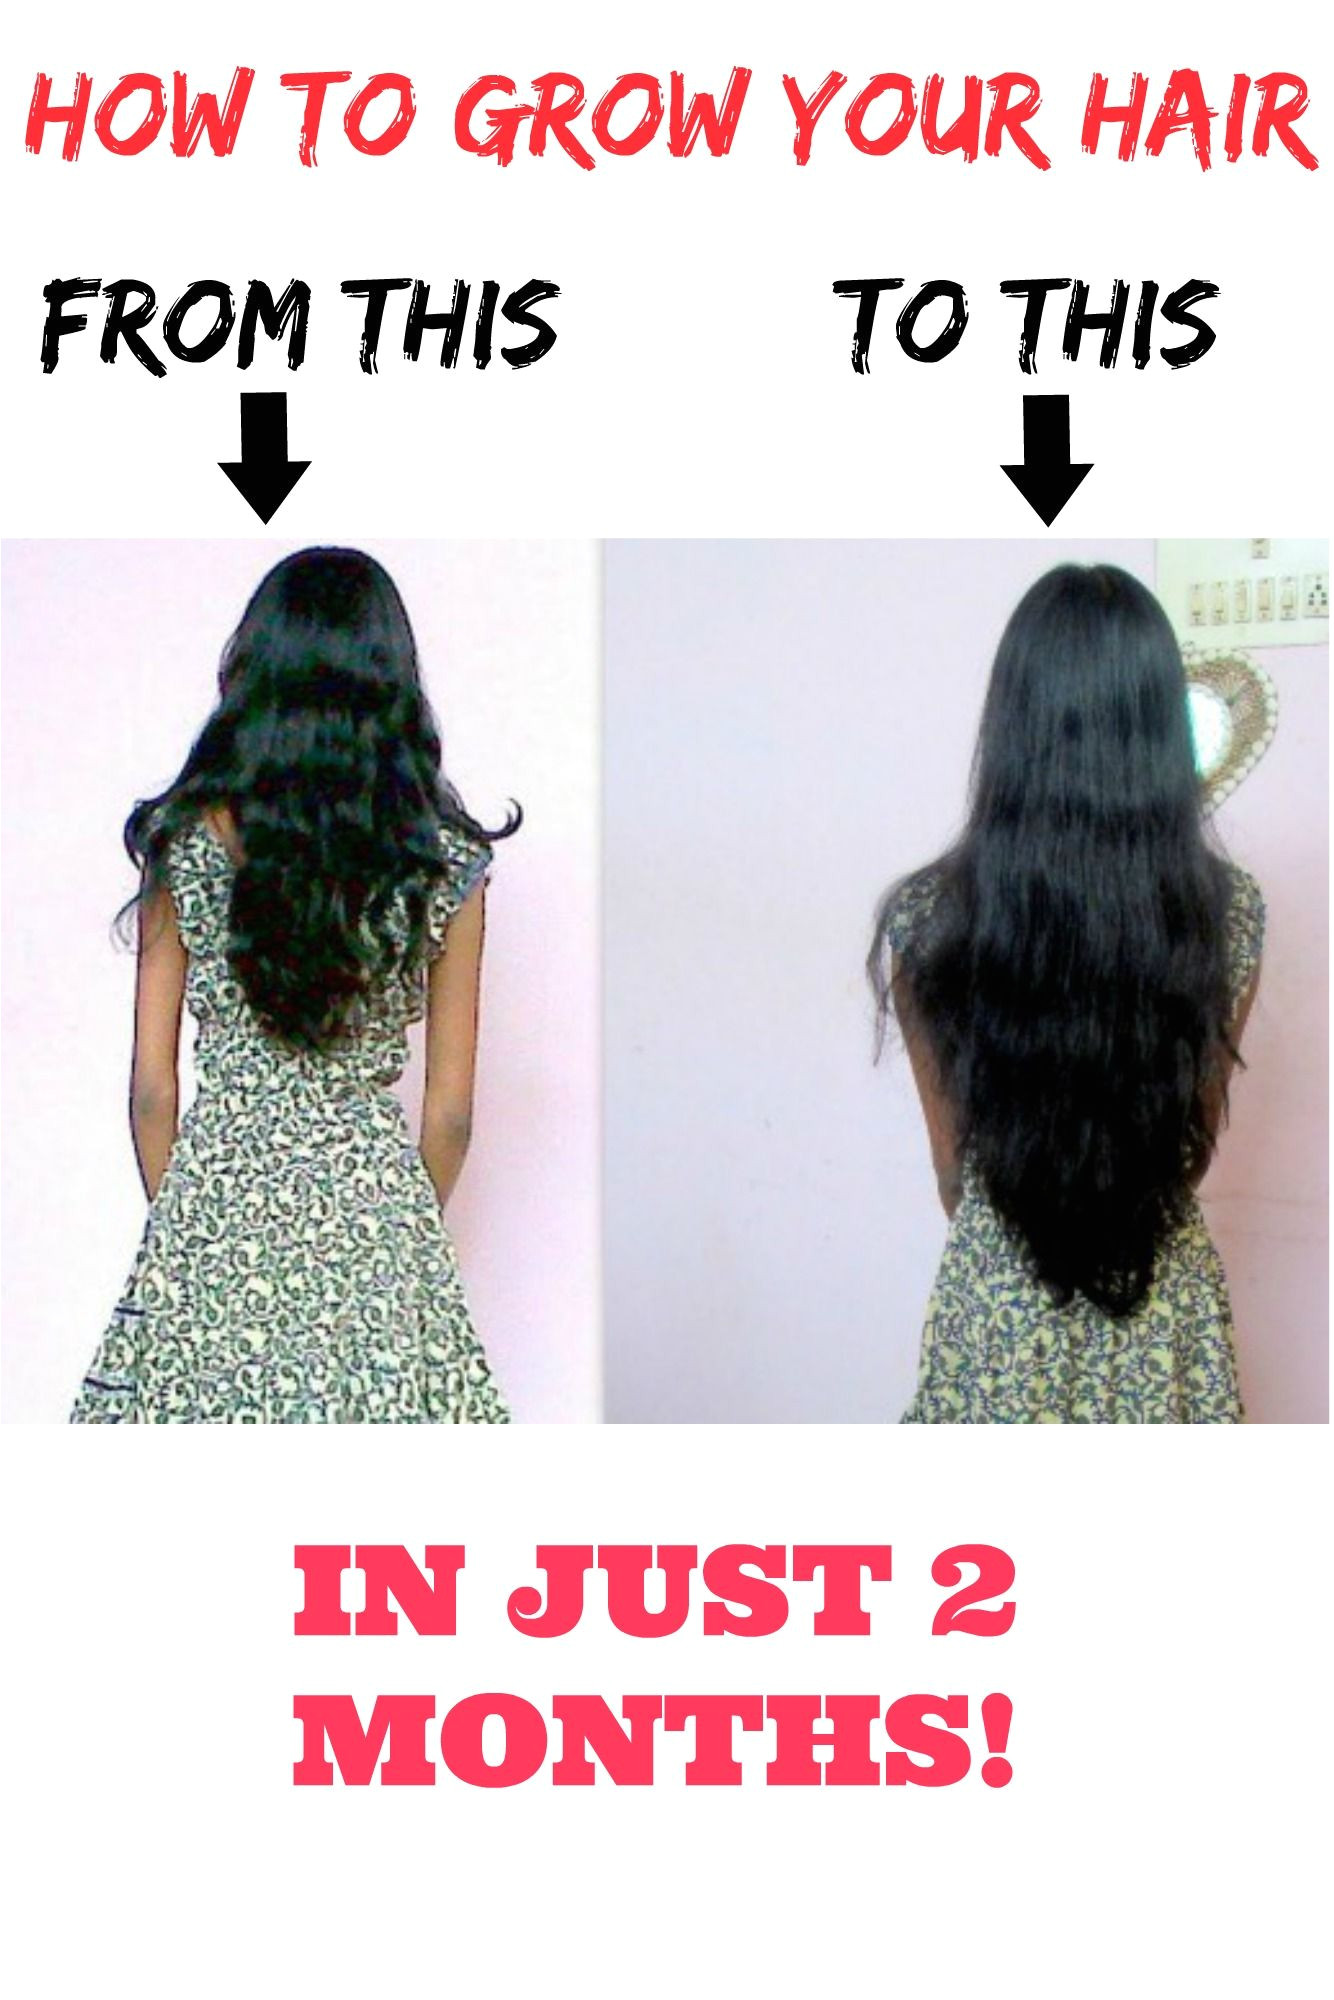 Rejuvalex Hair Growth Reviews How to Grow Your Hair Faster A to Z Stuff Pinterest Hair